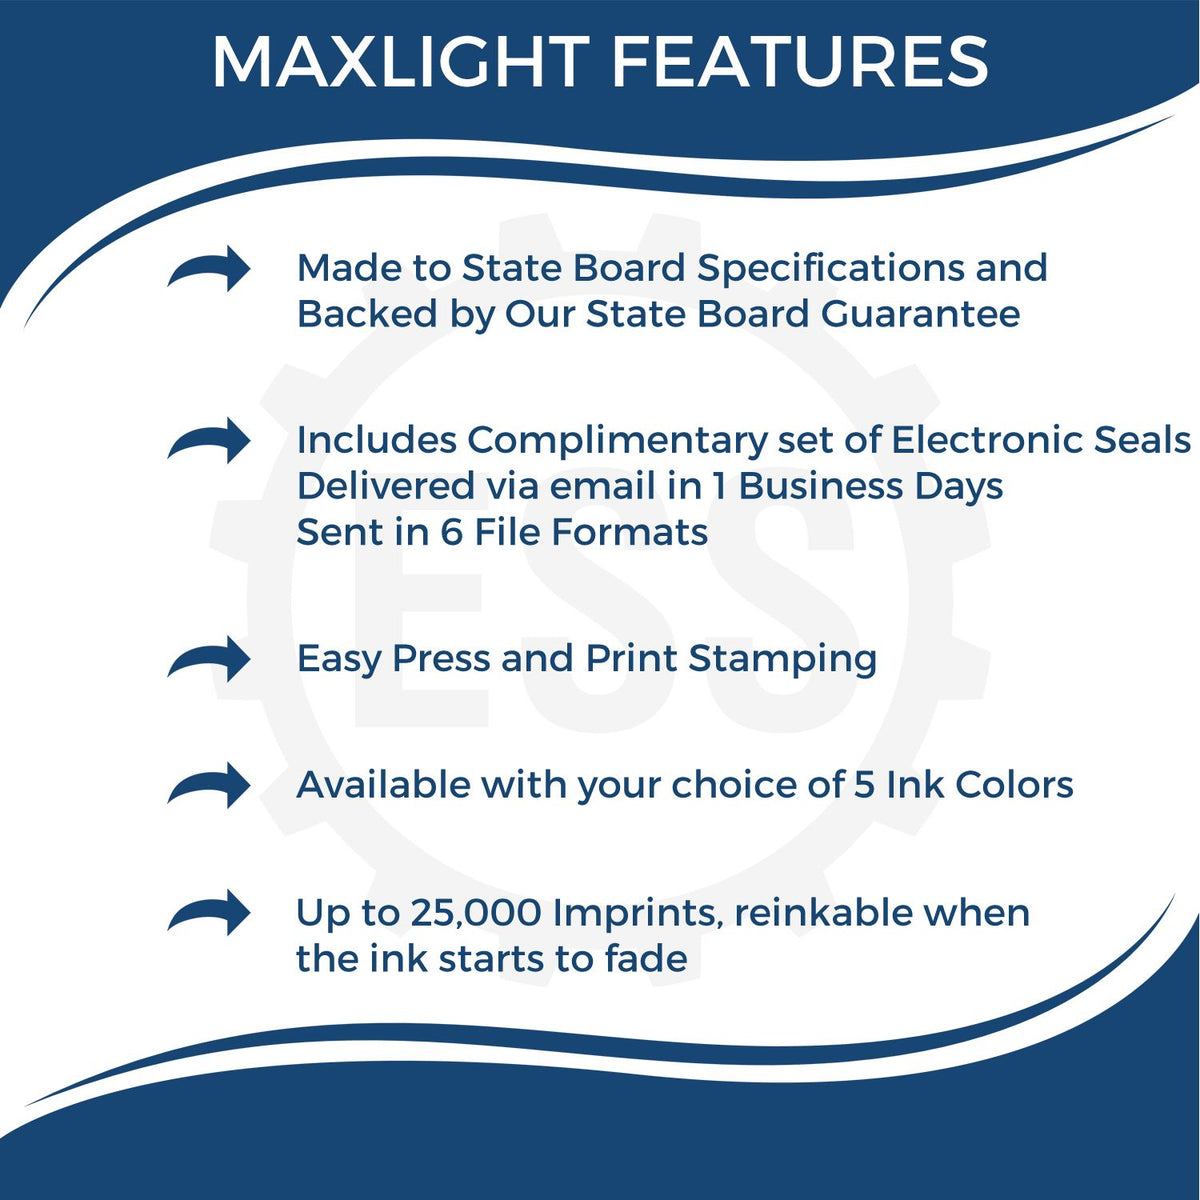 A picture of an infographic highlighting the selling points for the Premium MaxLight Pre-Inked Florida Geology Stamp